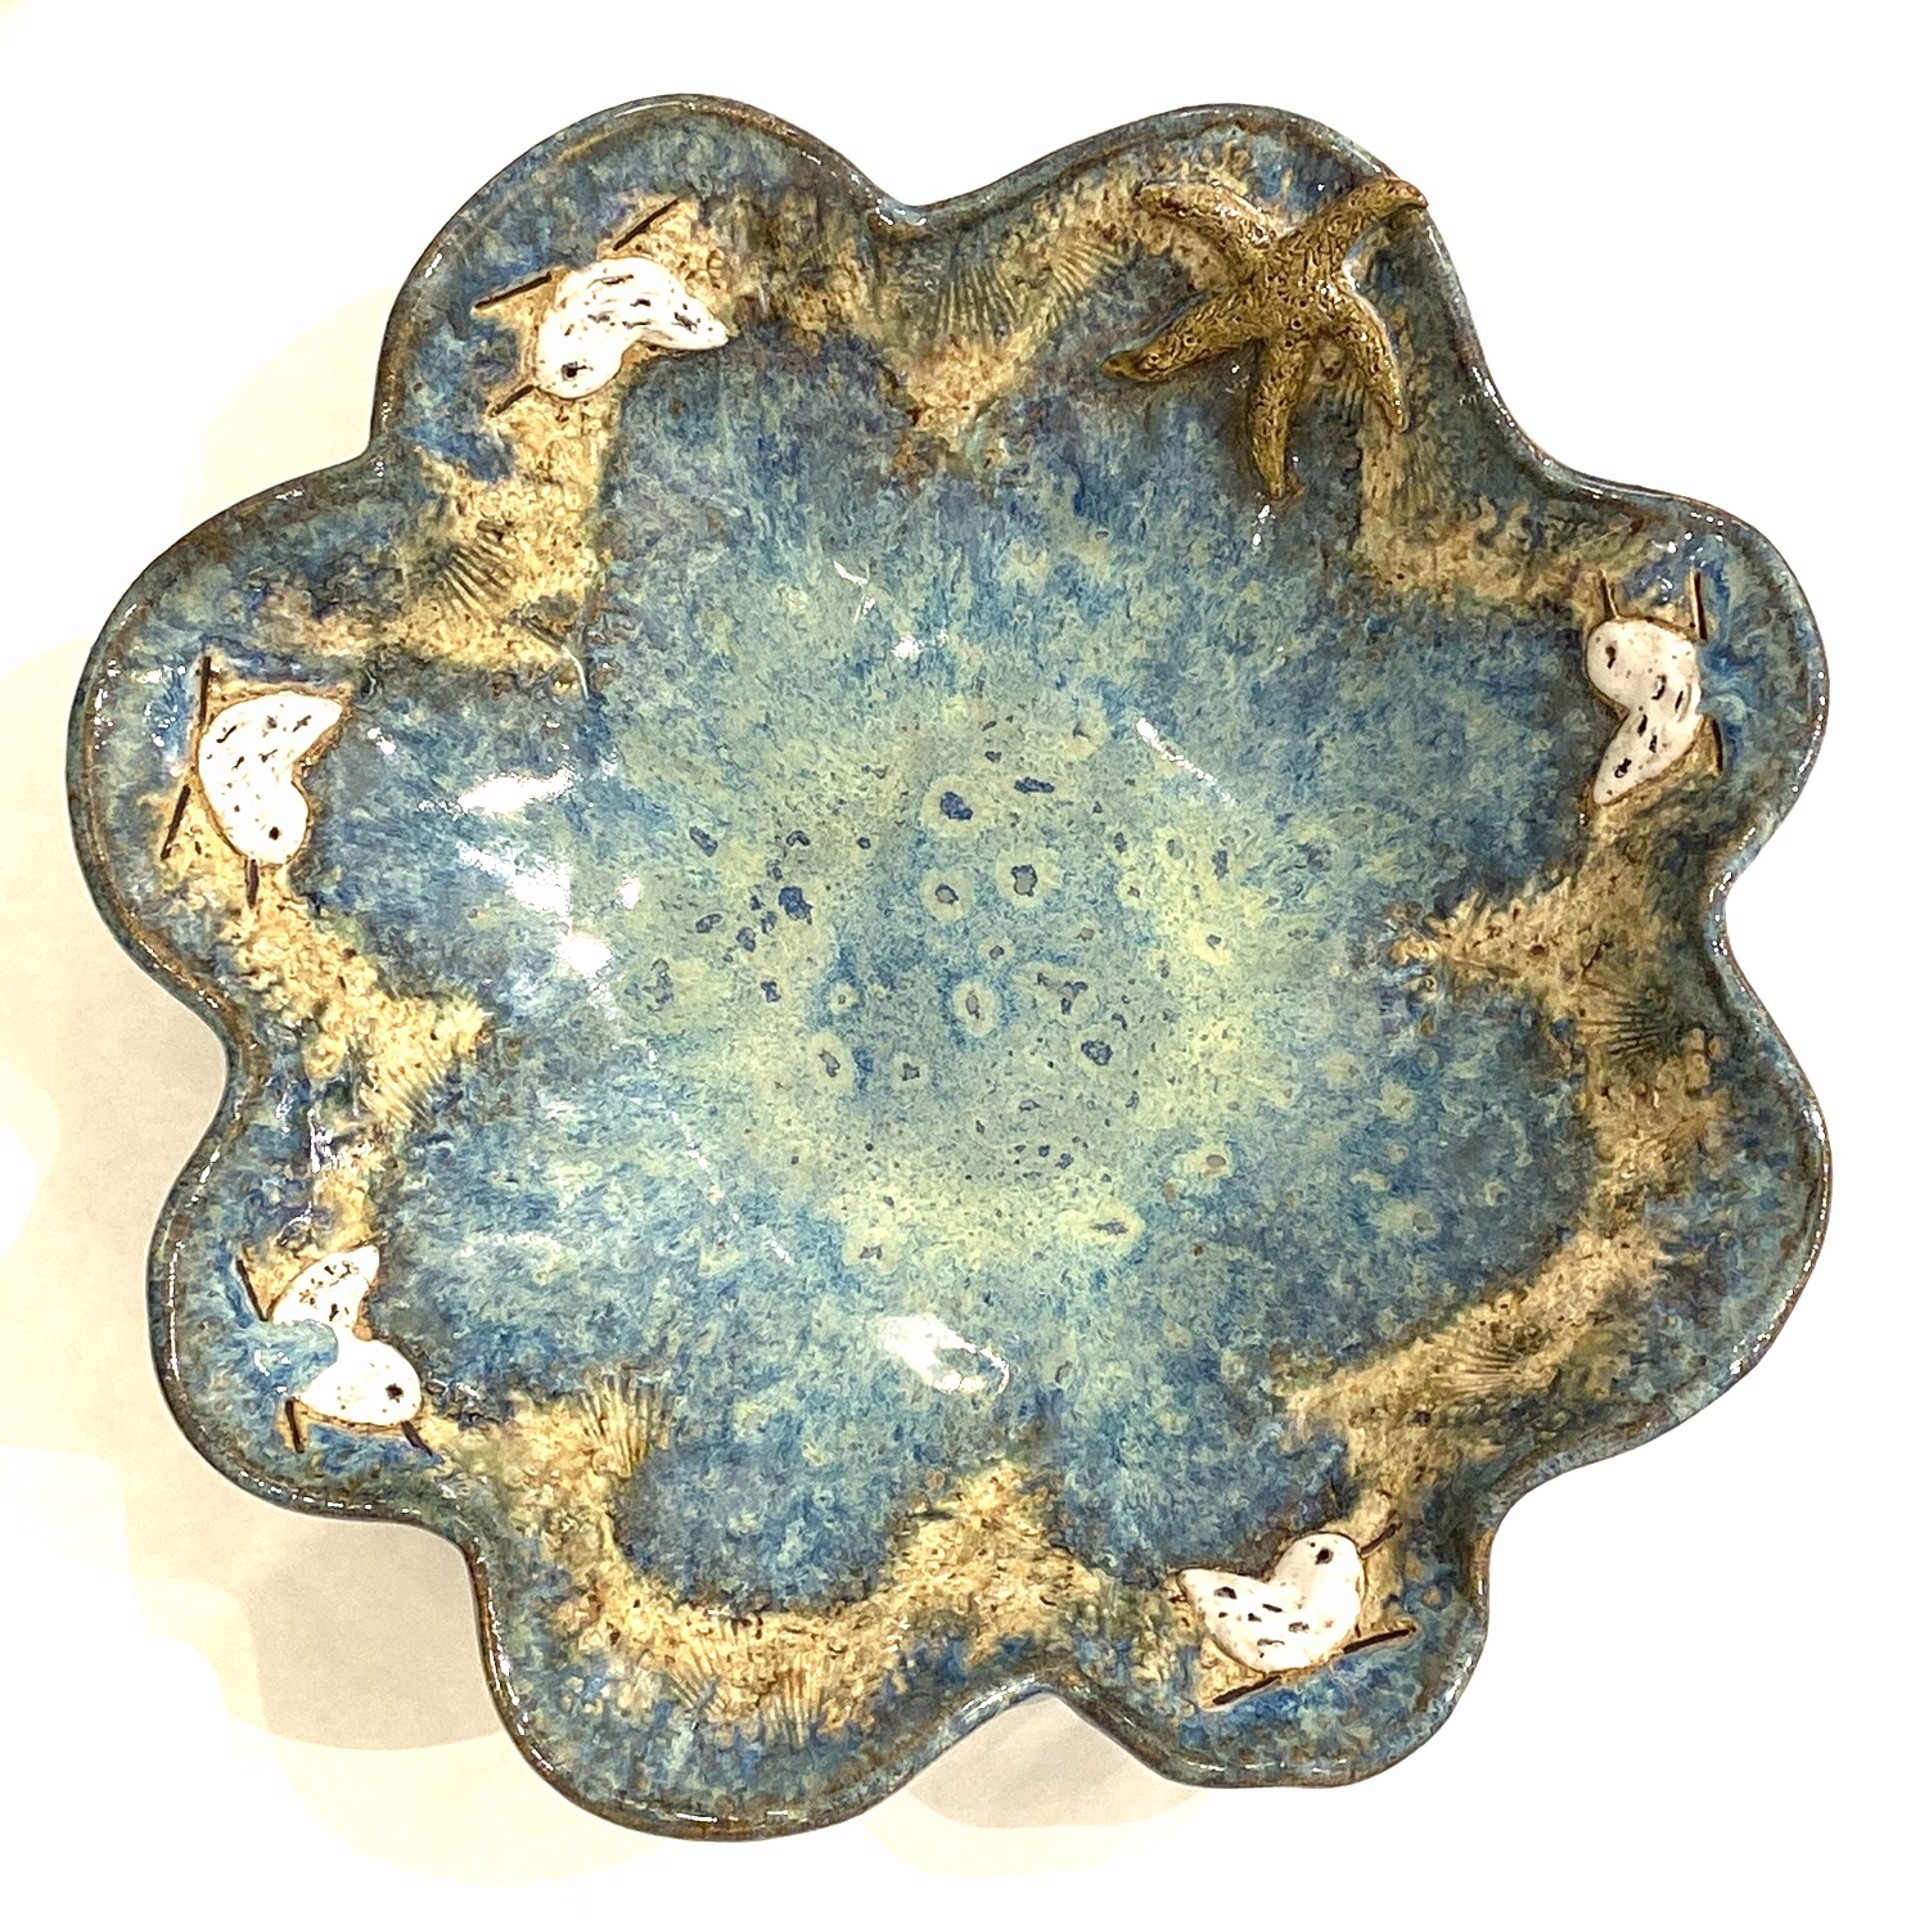 Five Sandpipers and Starfish Bowl (Blue Glaze) by Jim & Steffi Logan